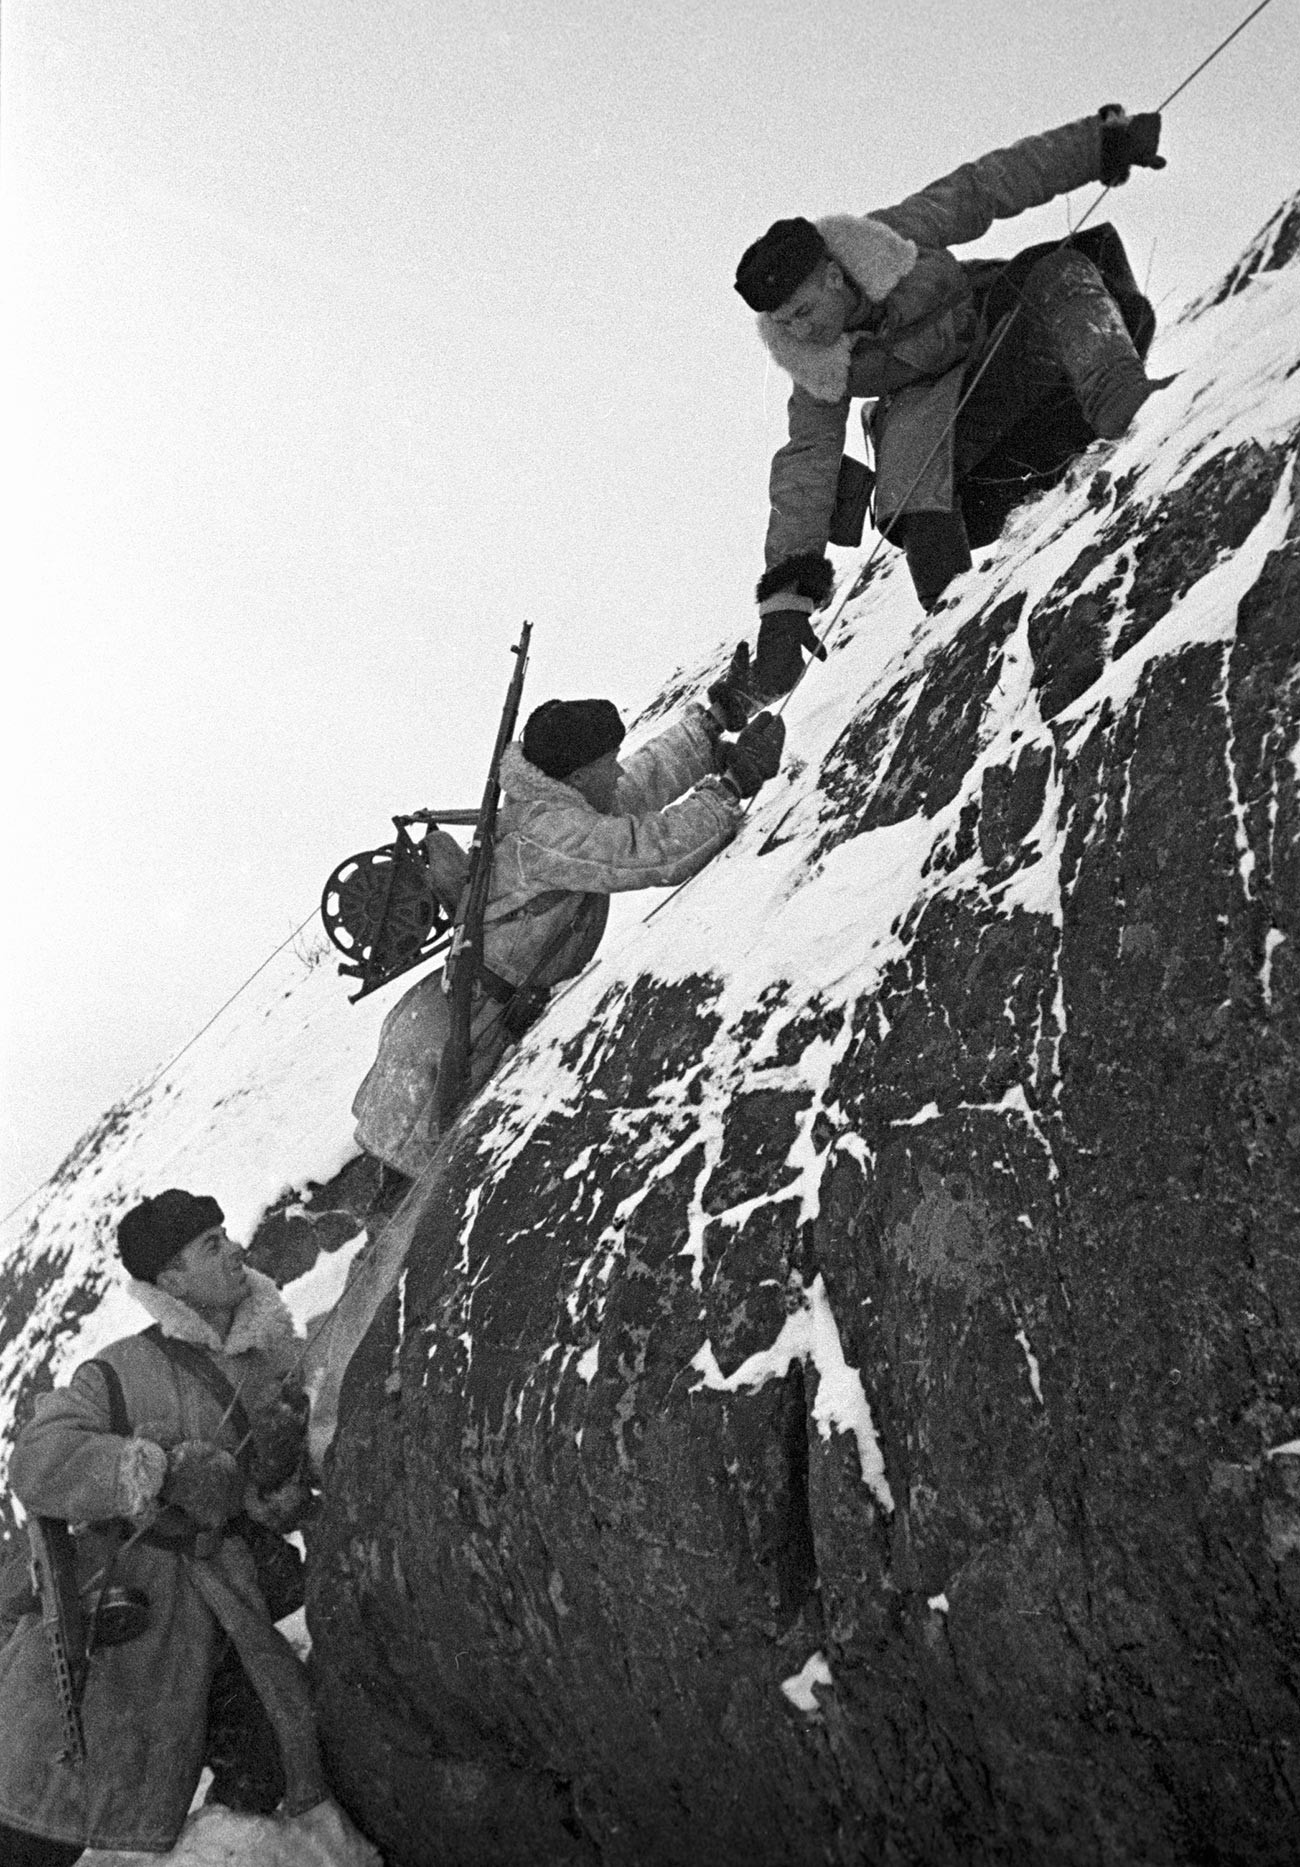 Soviet soldiers on the Rybachy peninsula.